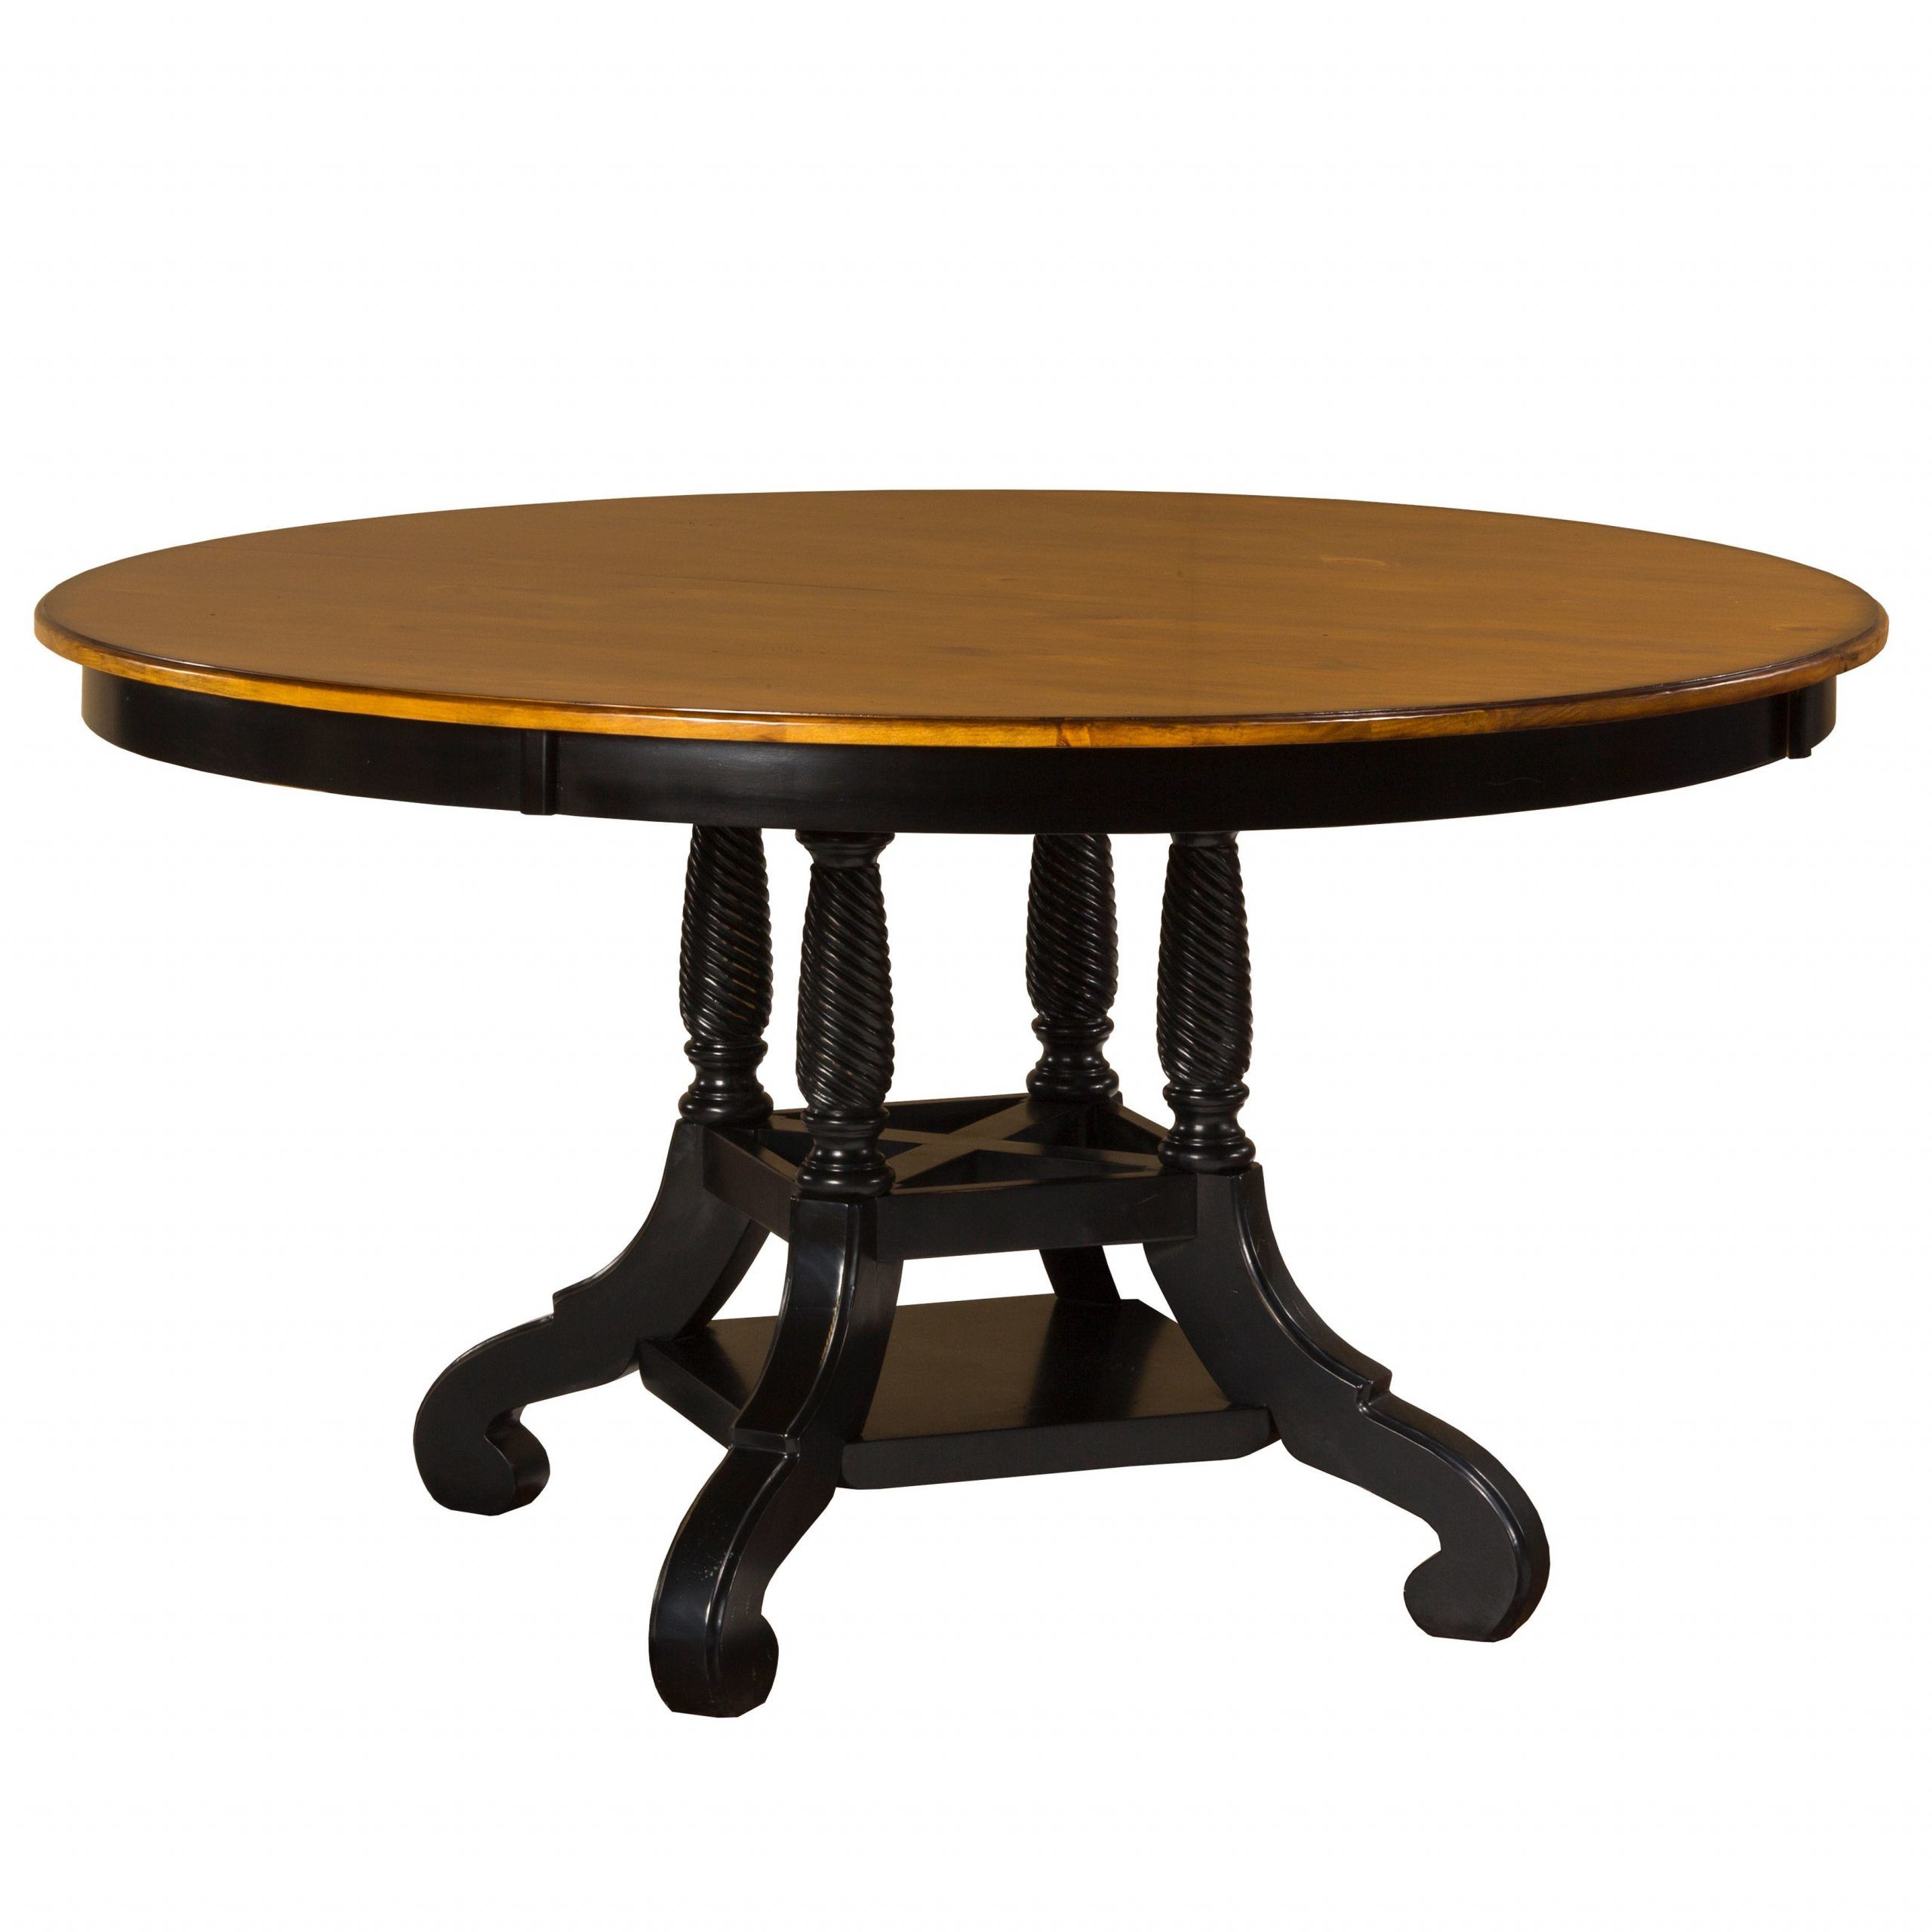 Hillsdale Furniture Wilshire Rubbed Black Wood Round Table Pertaining To Most Recent Blackened Oak Benchwright Pedestal Extending Dining Tables (View 9 of 25)